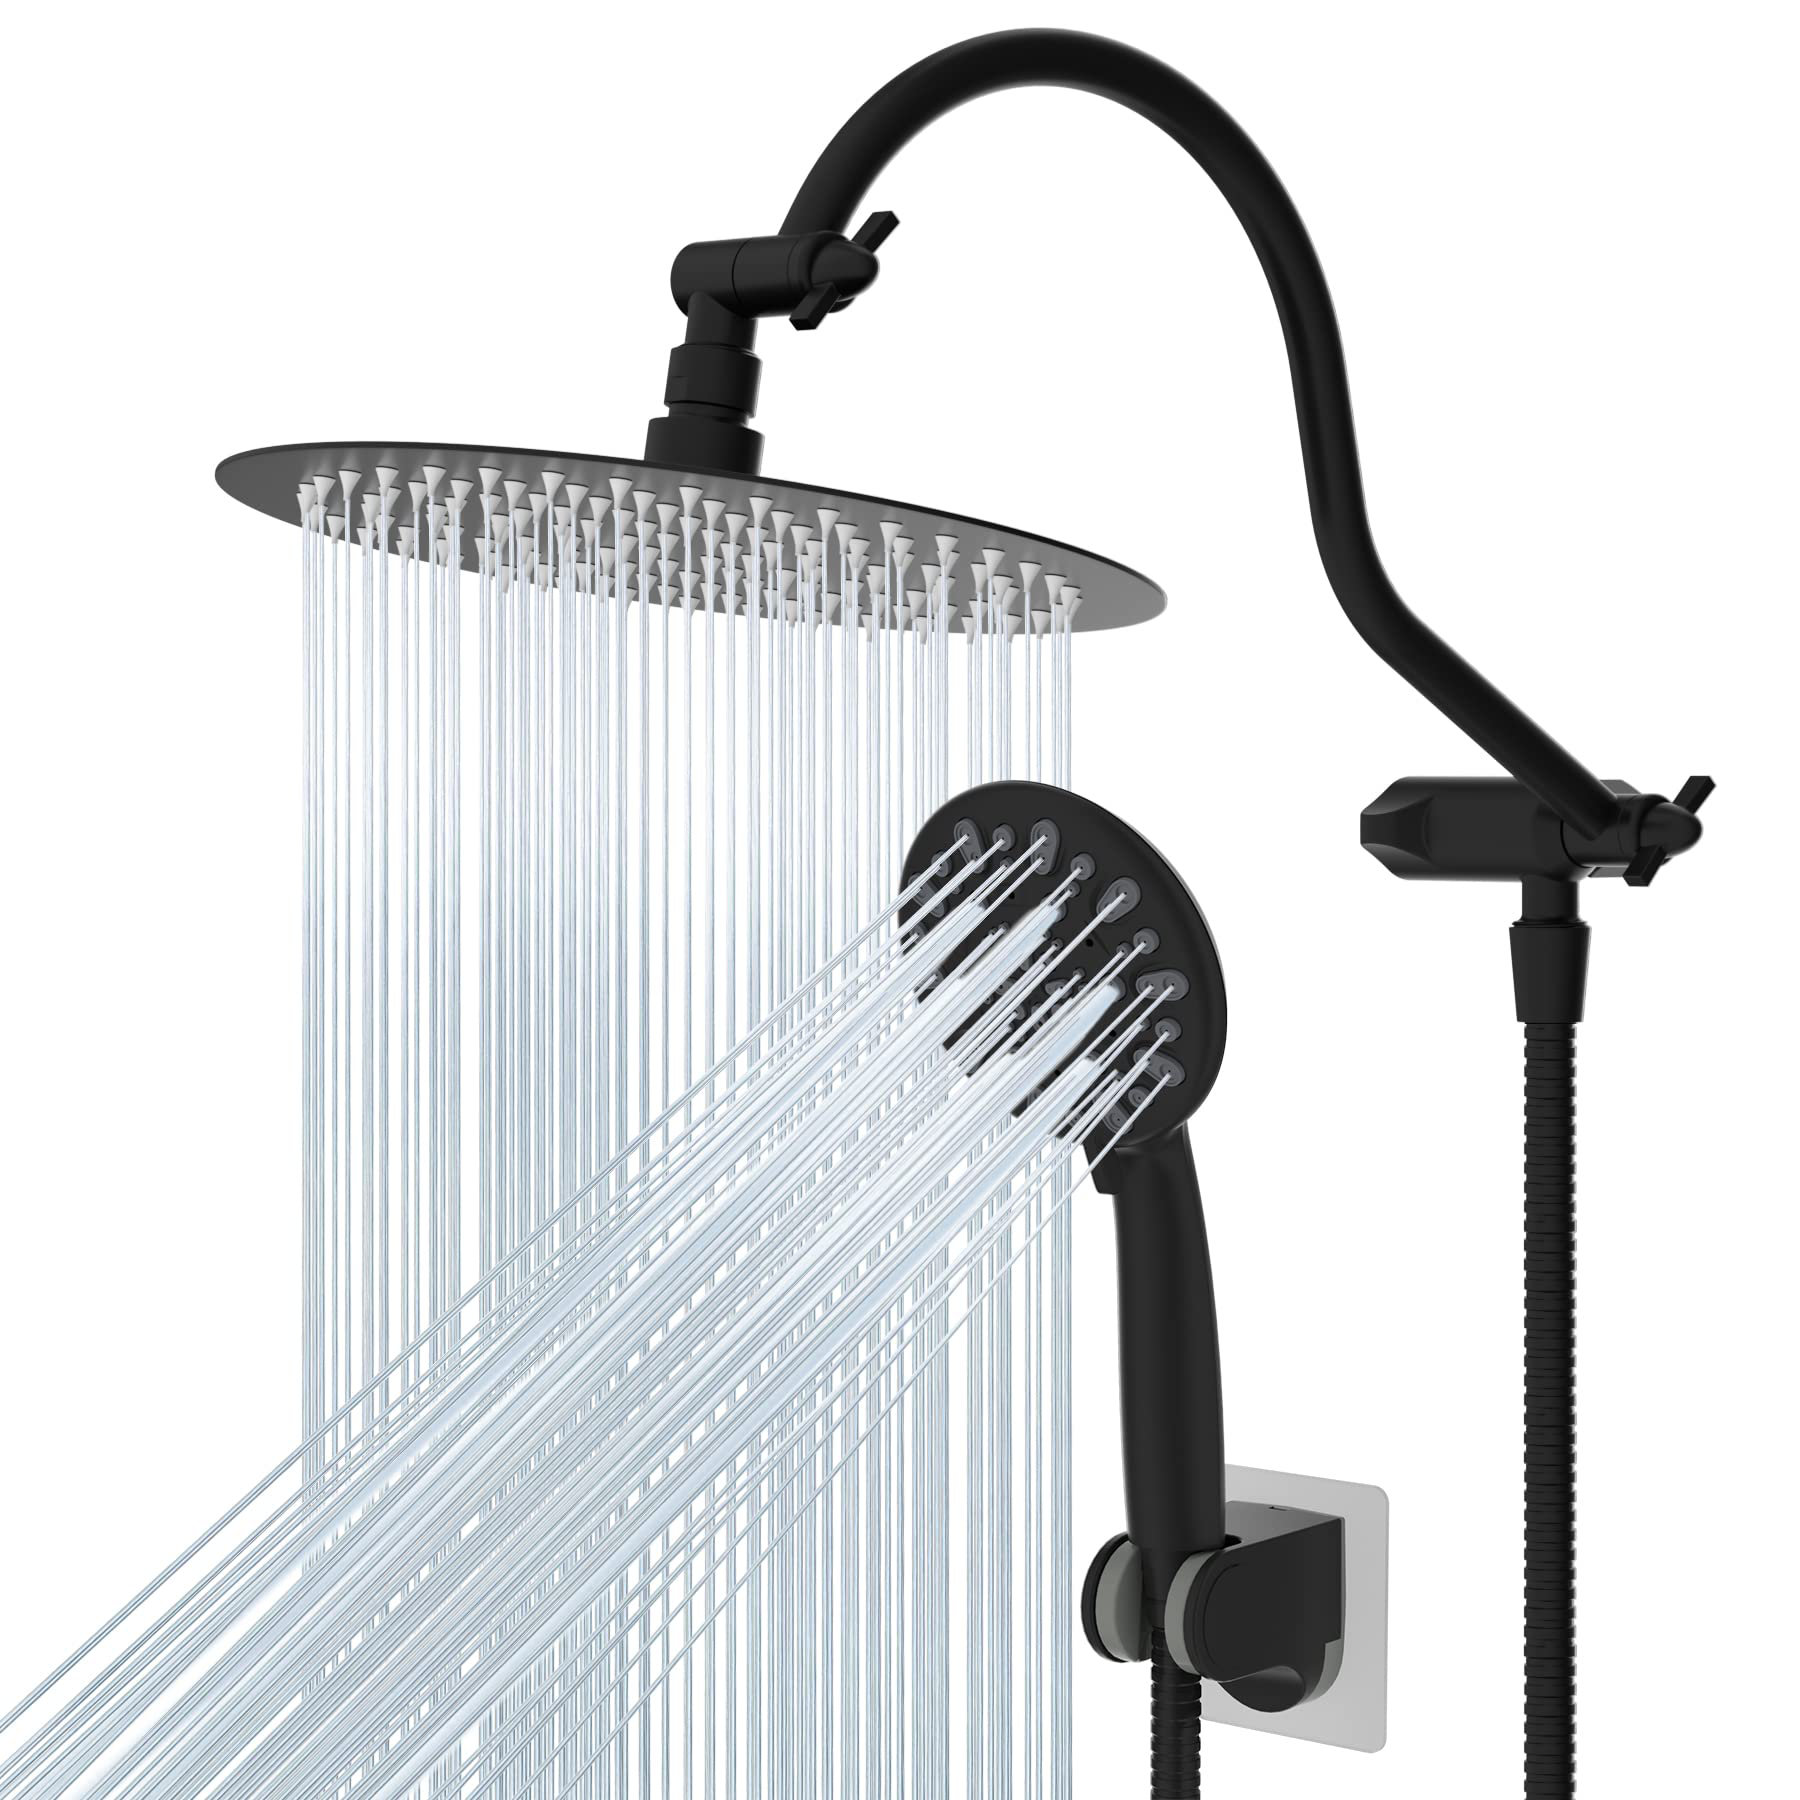 8 Rainfall Nozzle Shower Head - 19 Extended Arm - Oil Rubbed Bronze